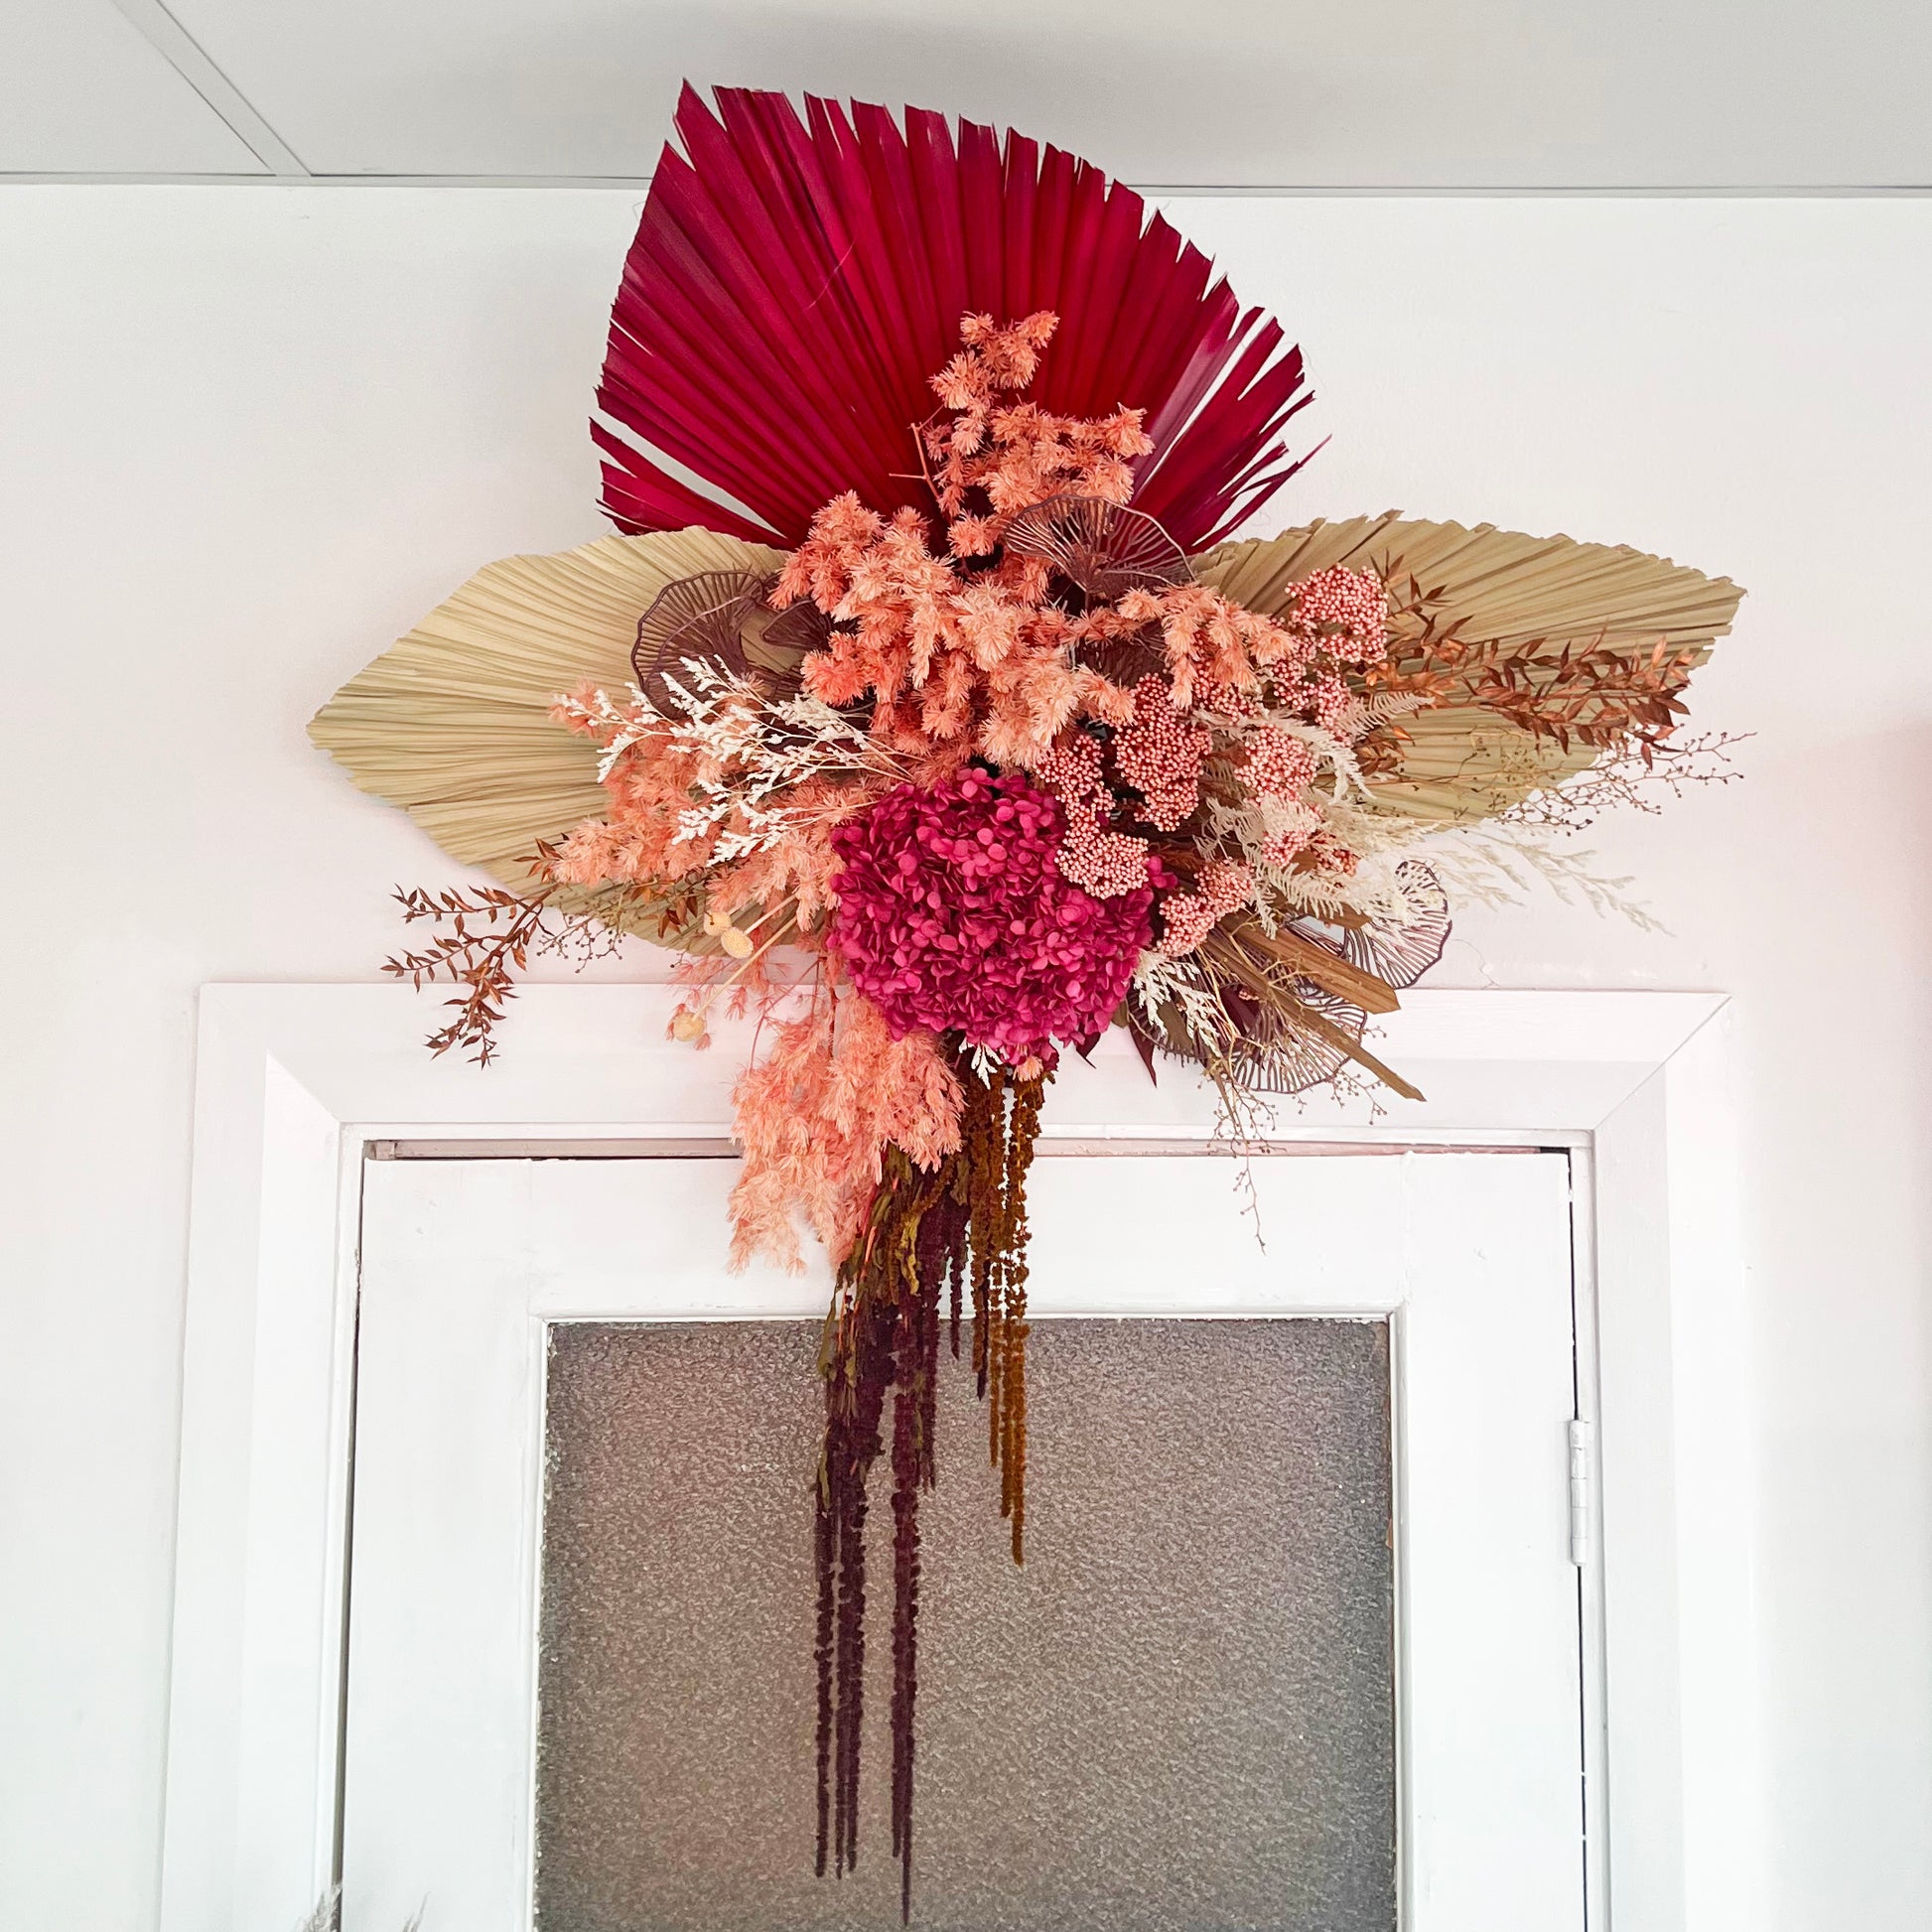 Our Flower Studio Preserved Hanging Floral Masterpiece